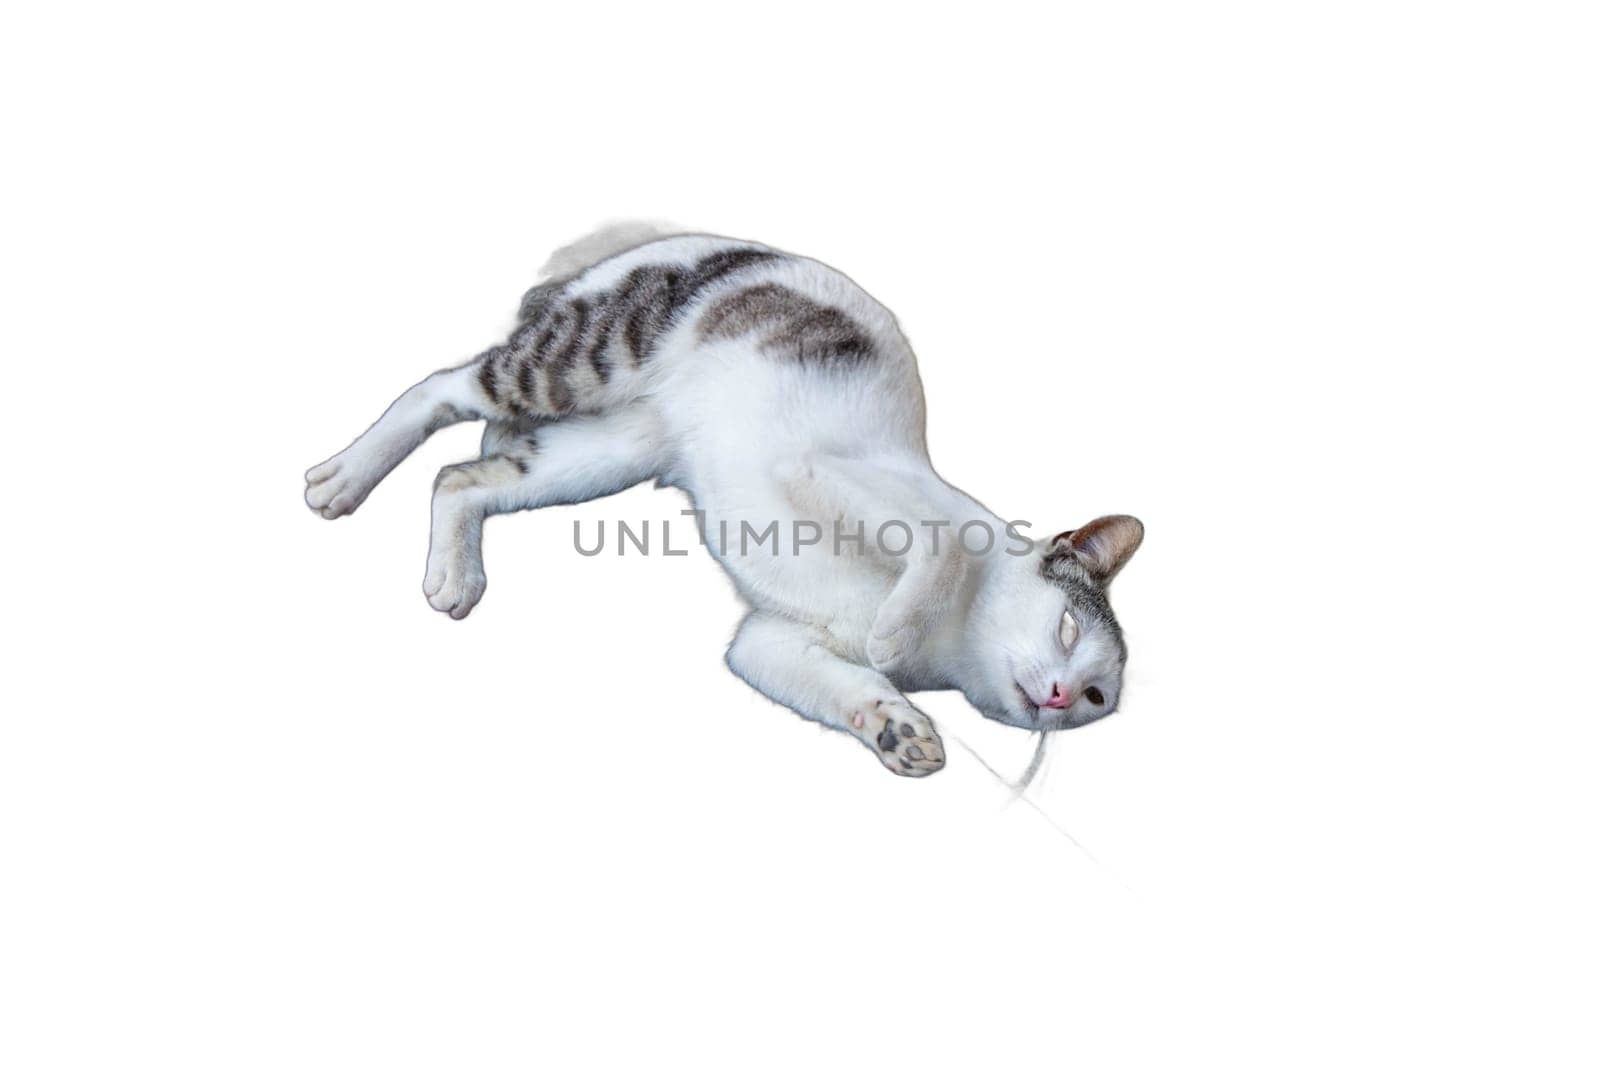 Relaxed Cat PNG Isolated: Lounging Felines. Cats, Felines, Pets, Animals, Lounging, Relaxing, Resting, Lying Down, PNG, Isolated, Transparent, Serene, Comfortable, Cozy, by DakotaBOldeman